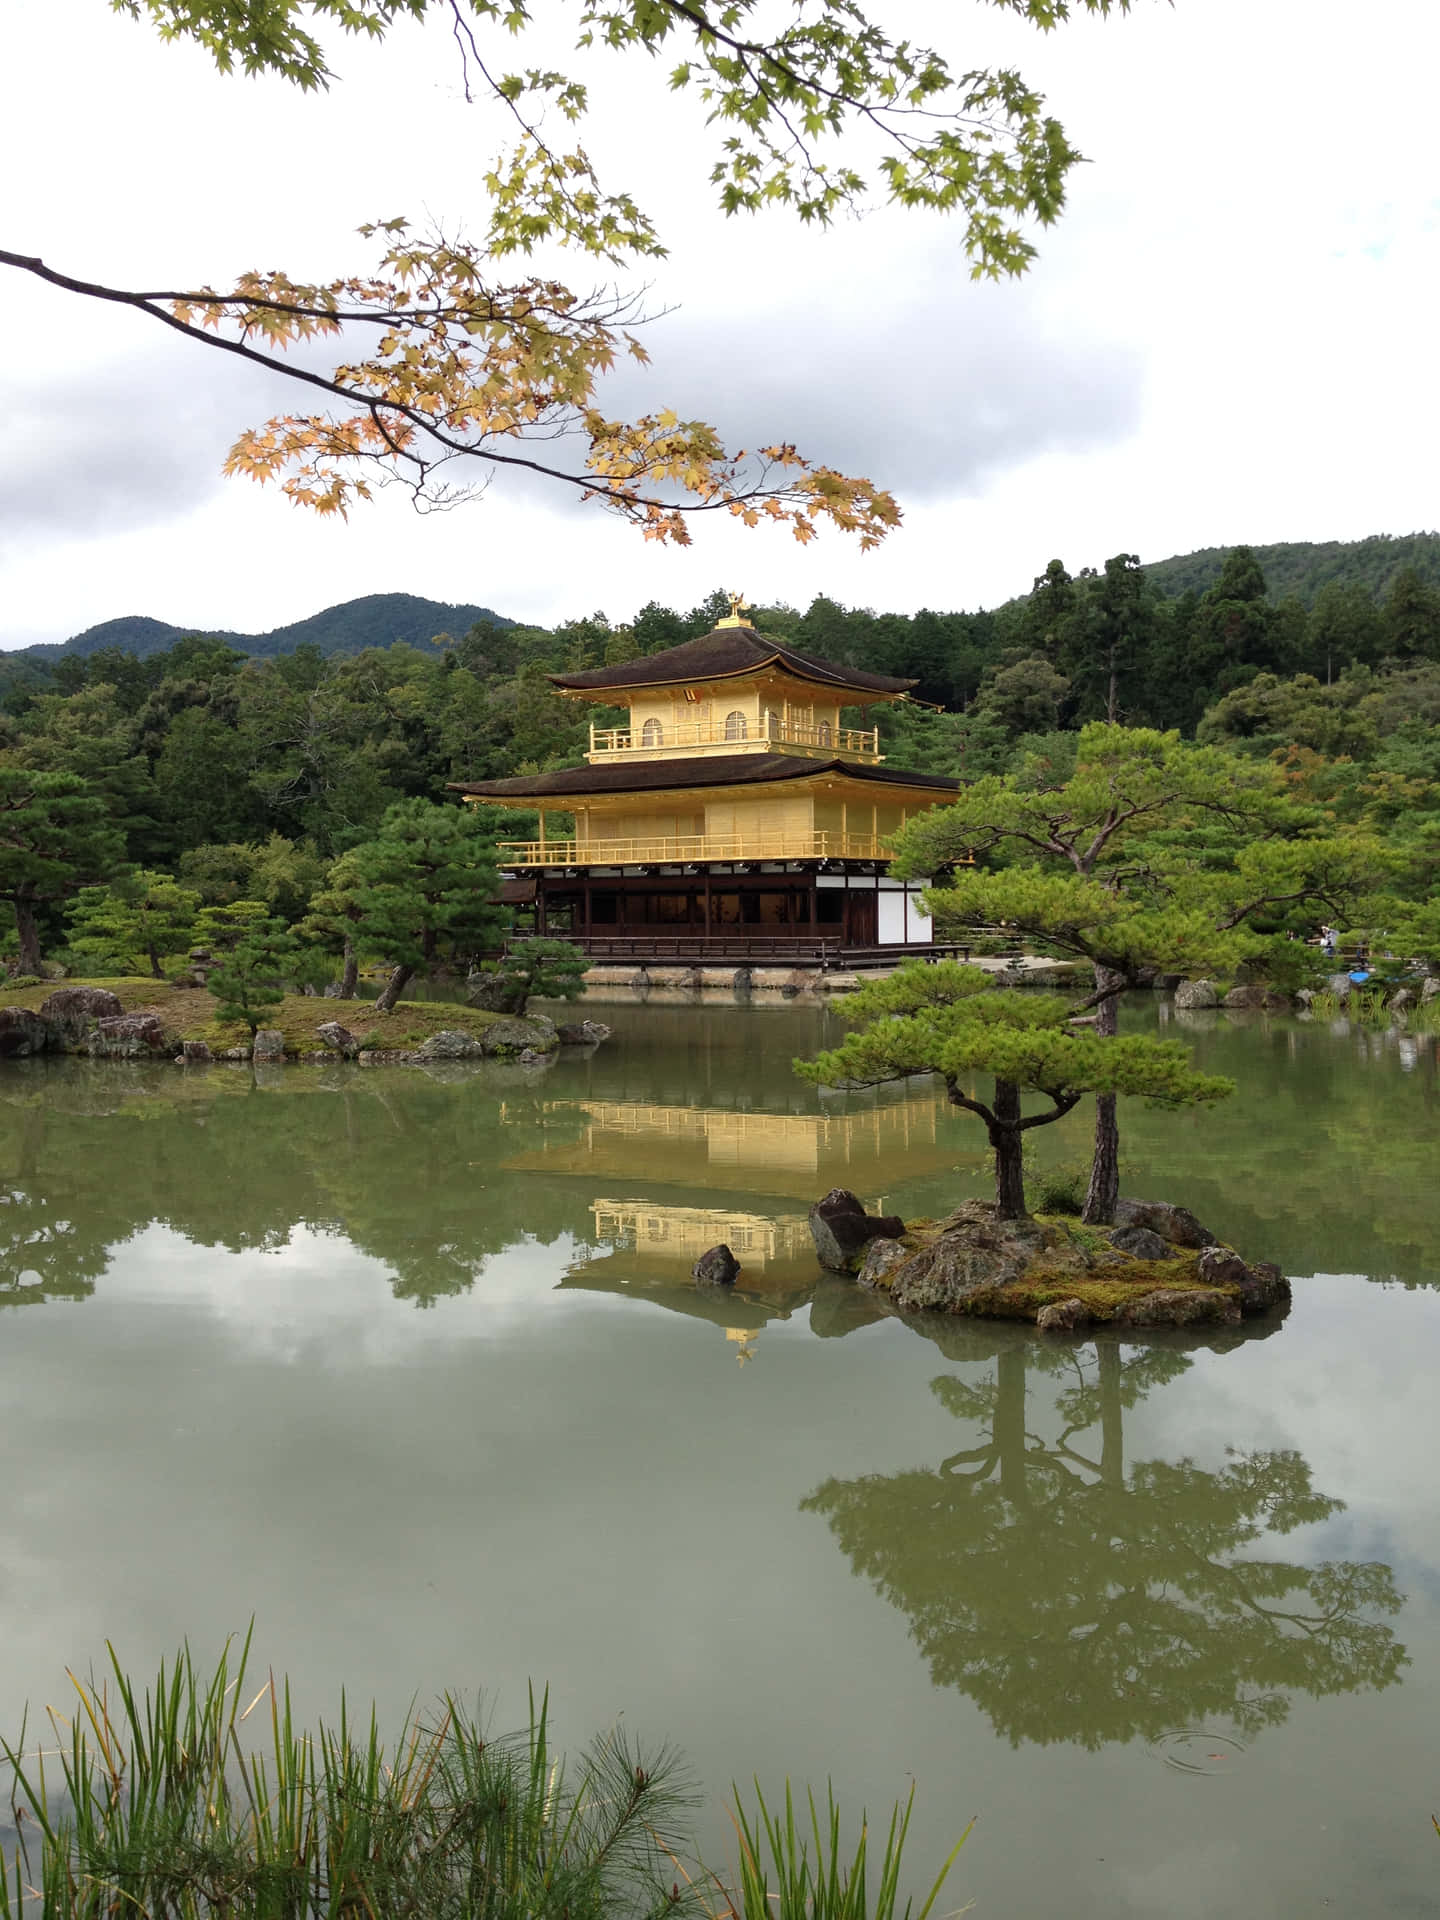 A traditional Japanese temple in a vibrant green landscape